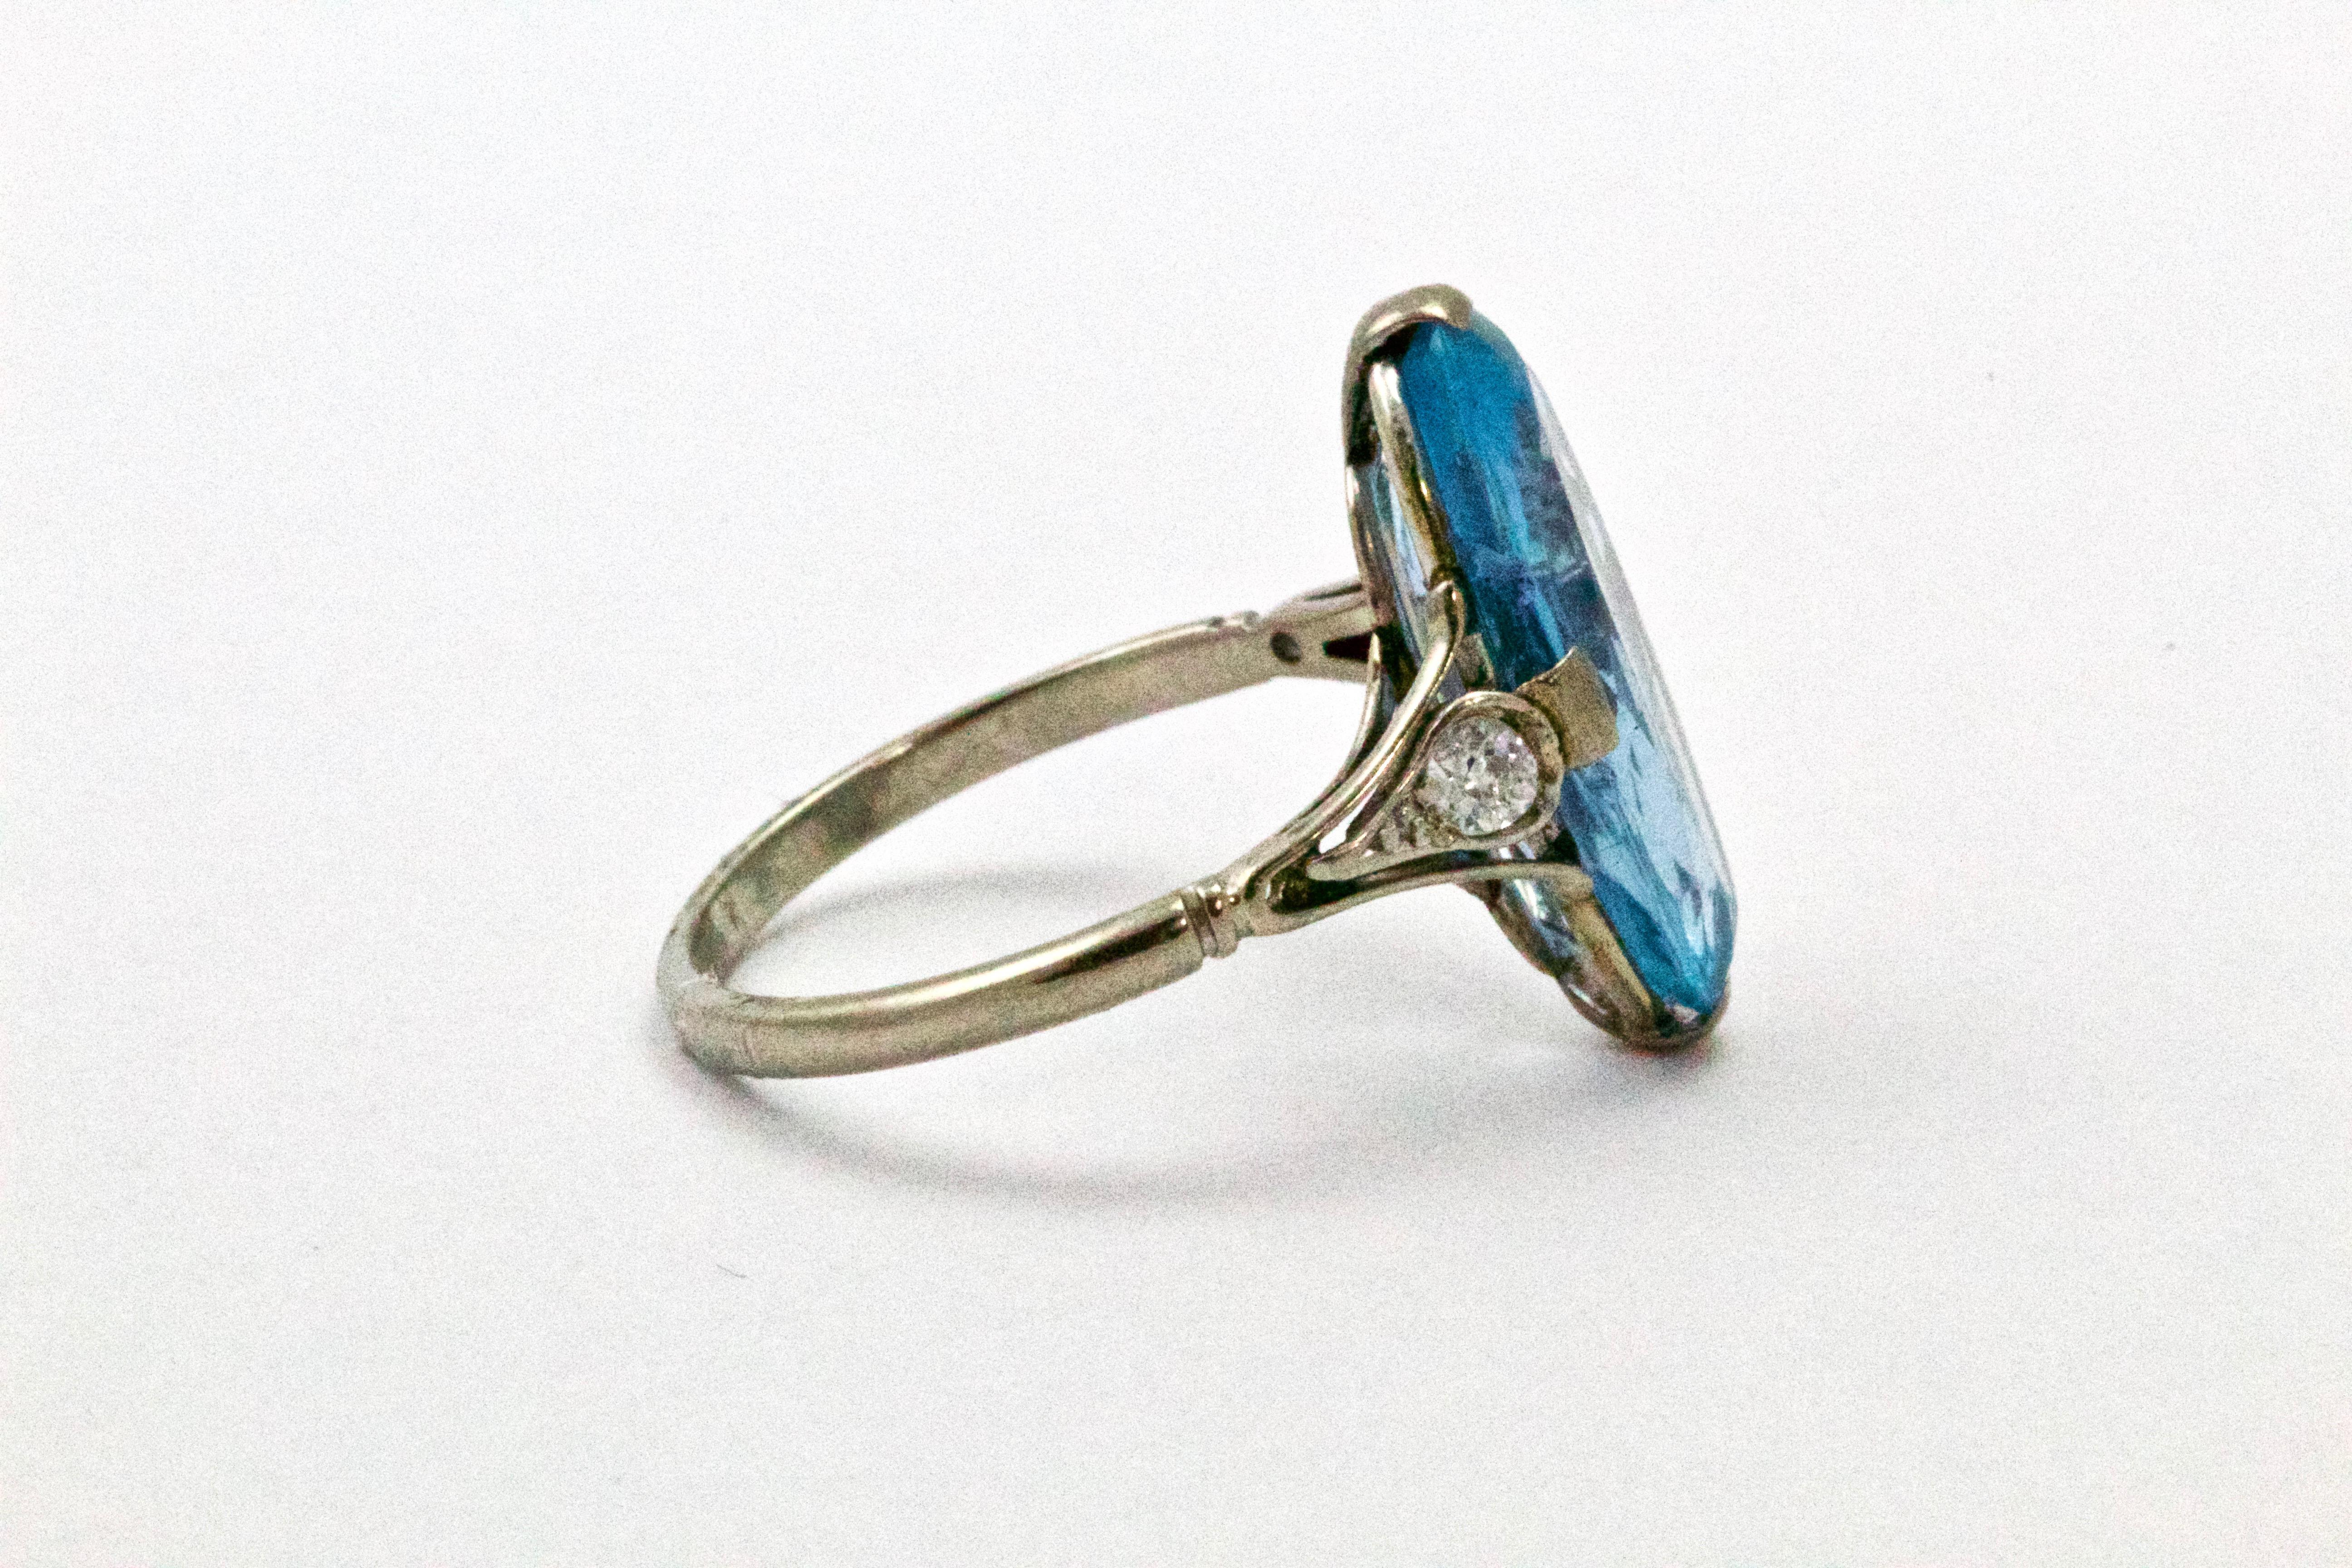 This spectacular Art Deco piece is showcasing a 5 carat oval cut aquamarine flanked my two old European cut diamonds in delicate open-worked shoulders 
Weight: 3.2 grams
Ring Size: M or 6 1/4